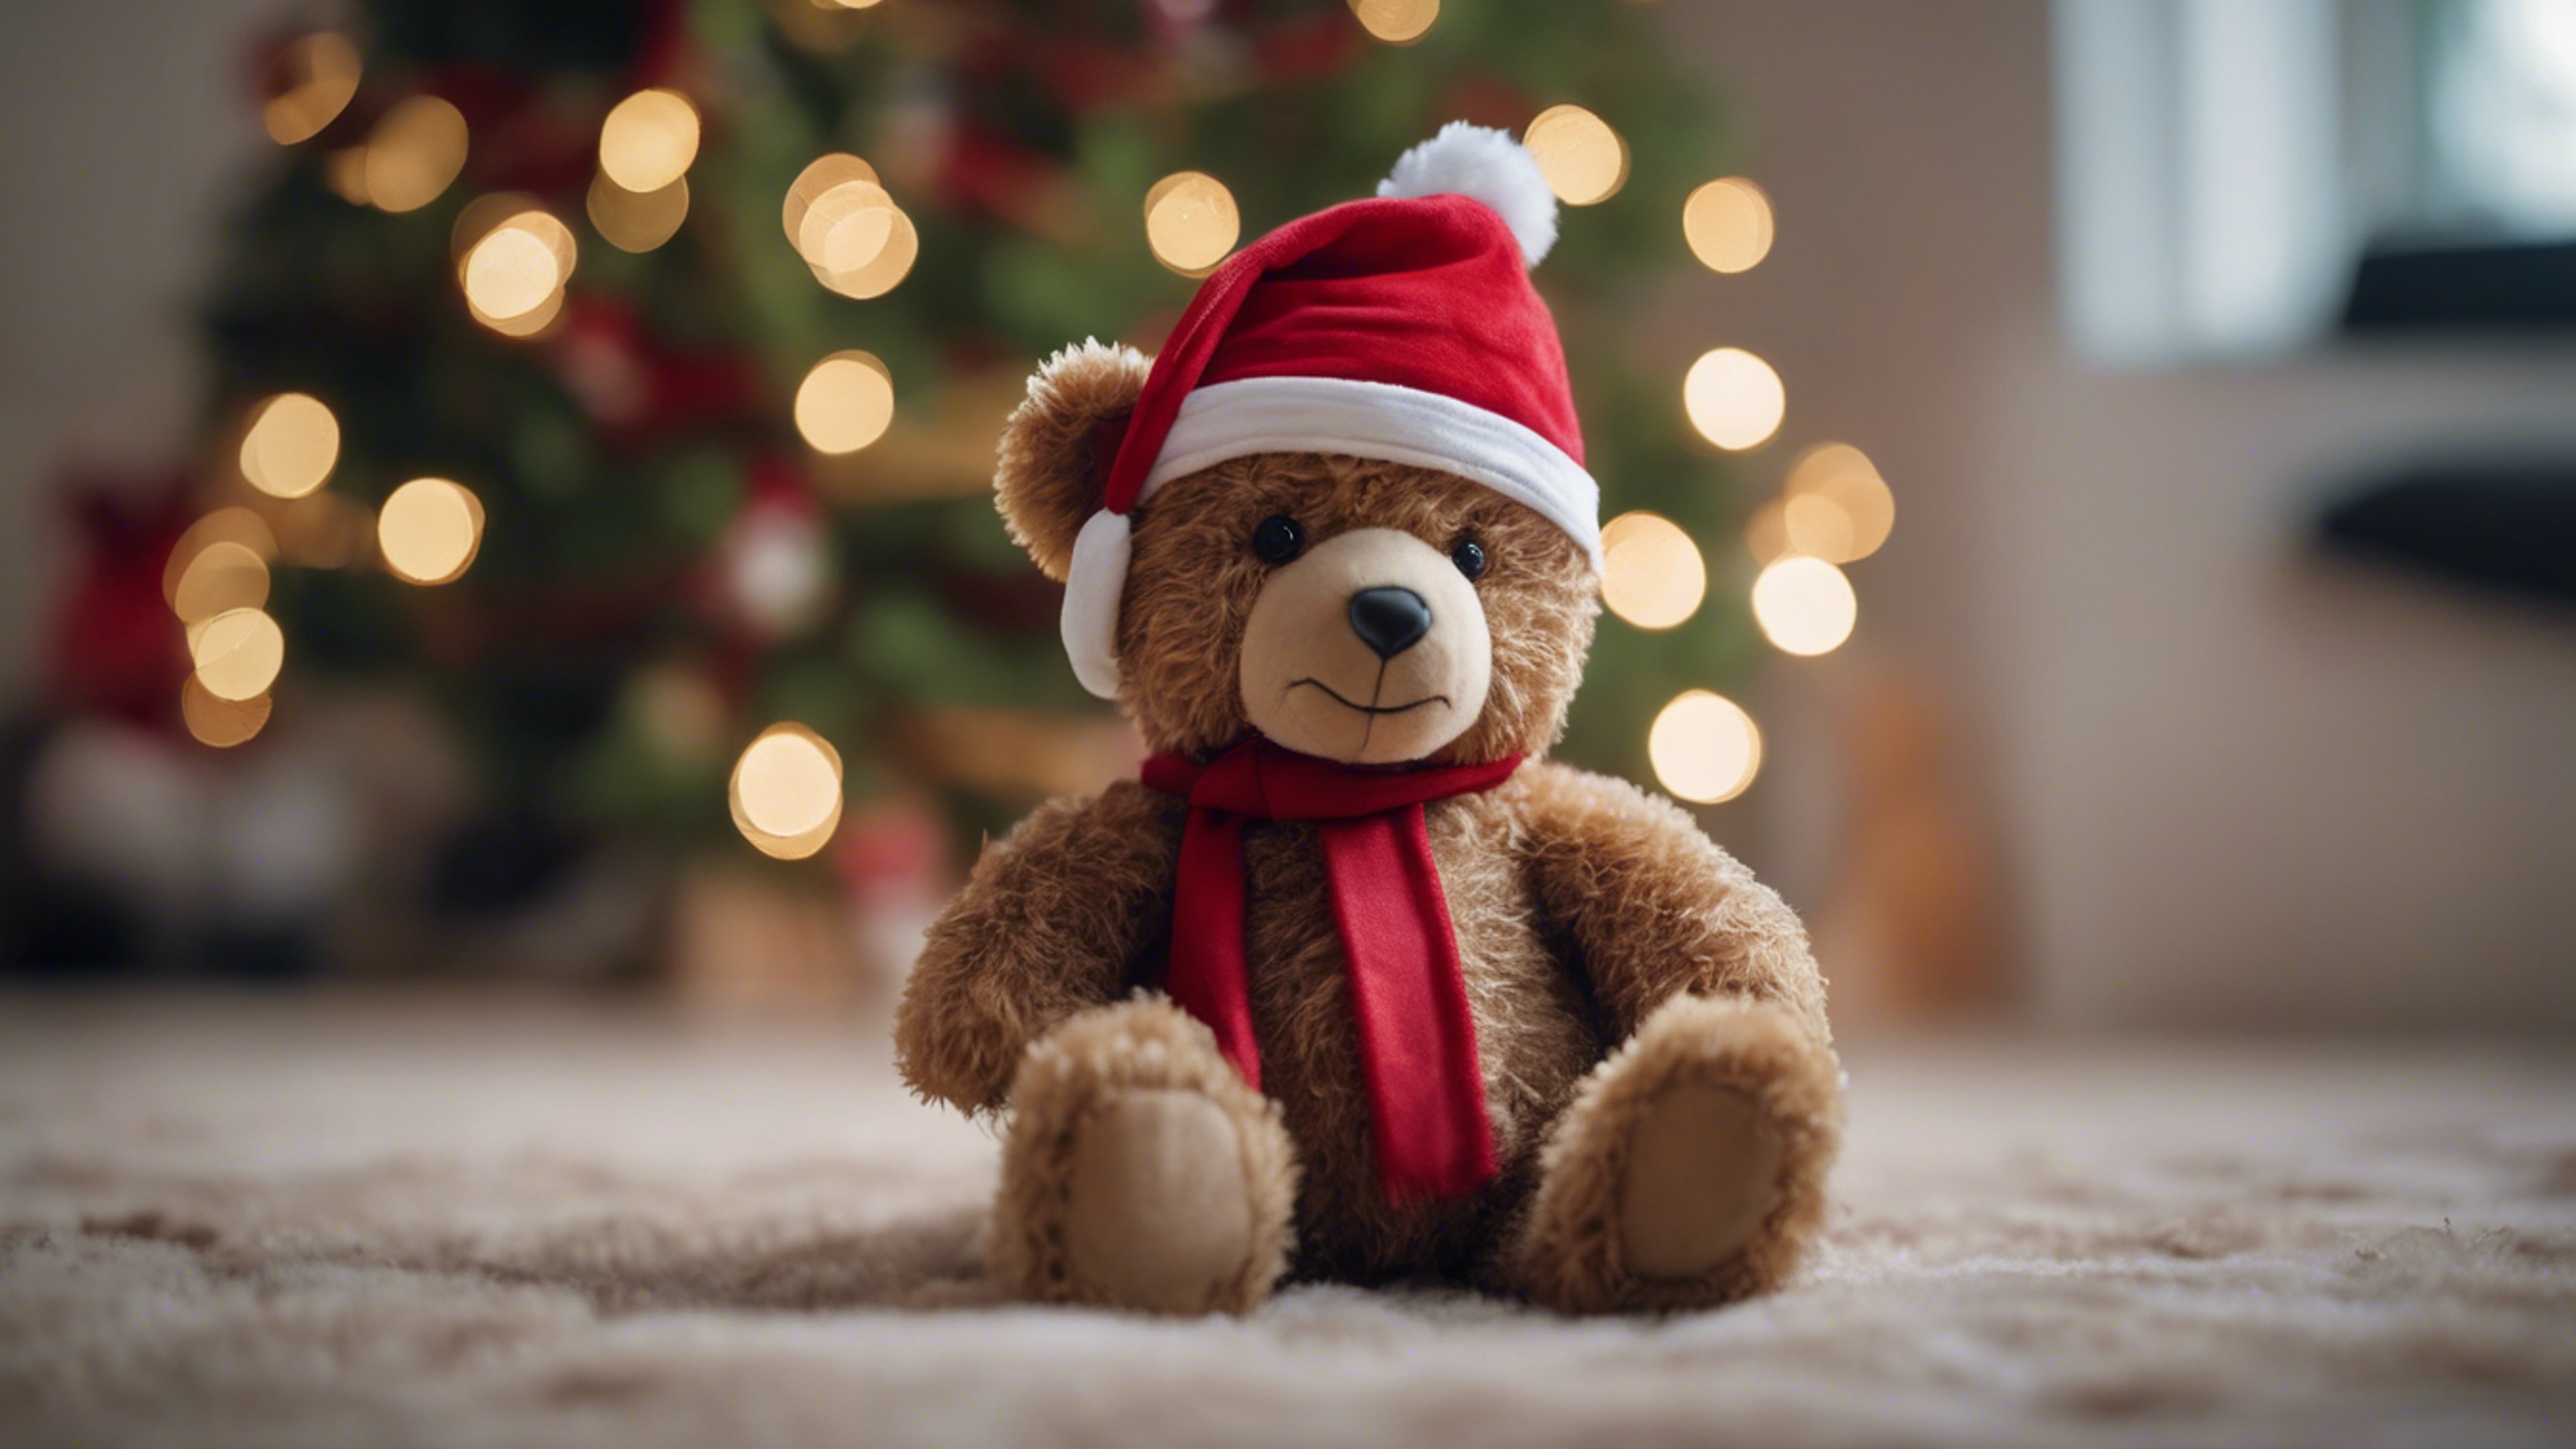 A teddy bear wearing a red Christmas hat, sitting next to a Christmas tree. Kertas dinding[764052ee6d604b67a698]